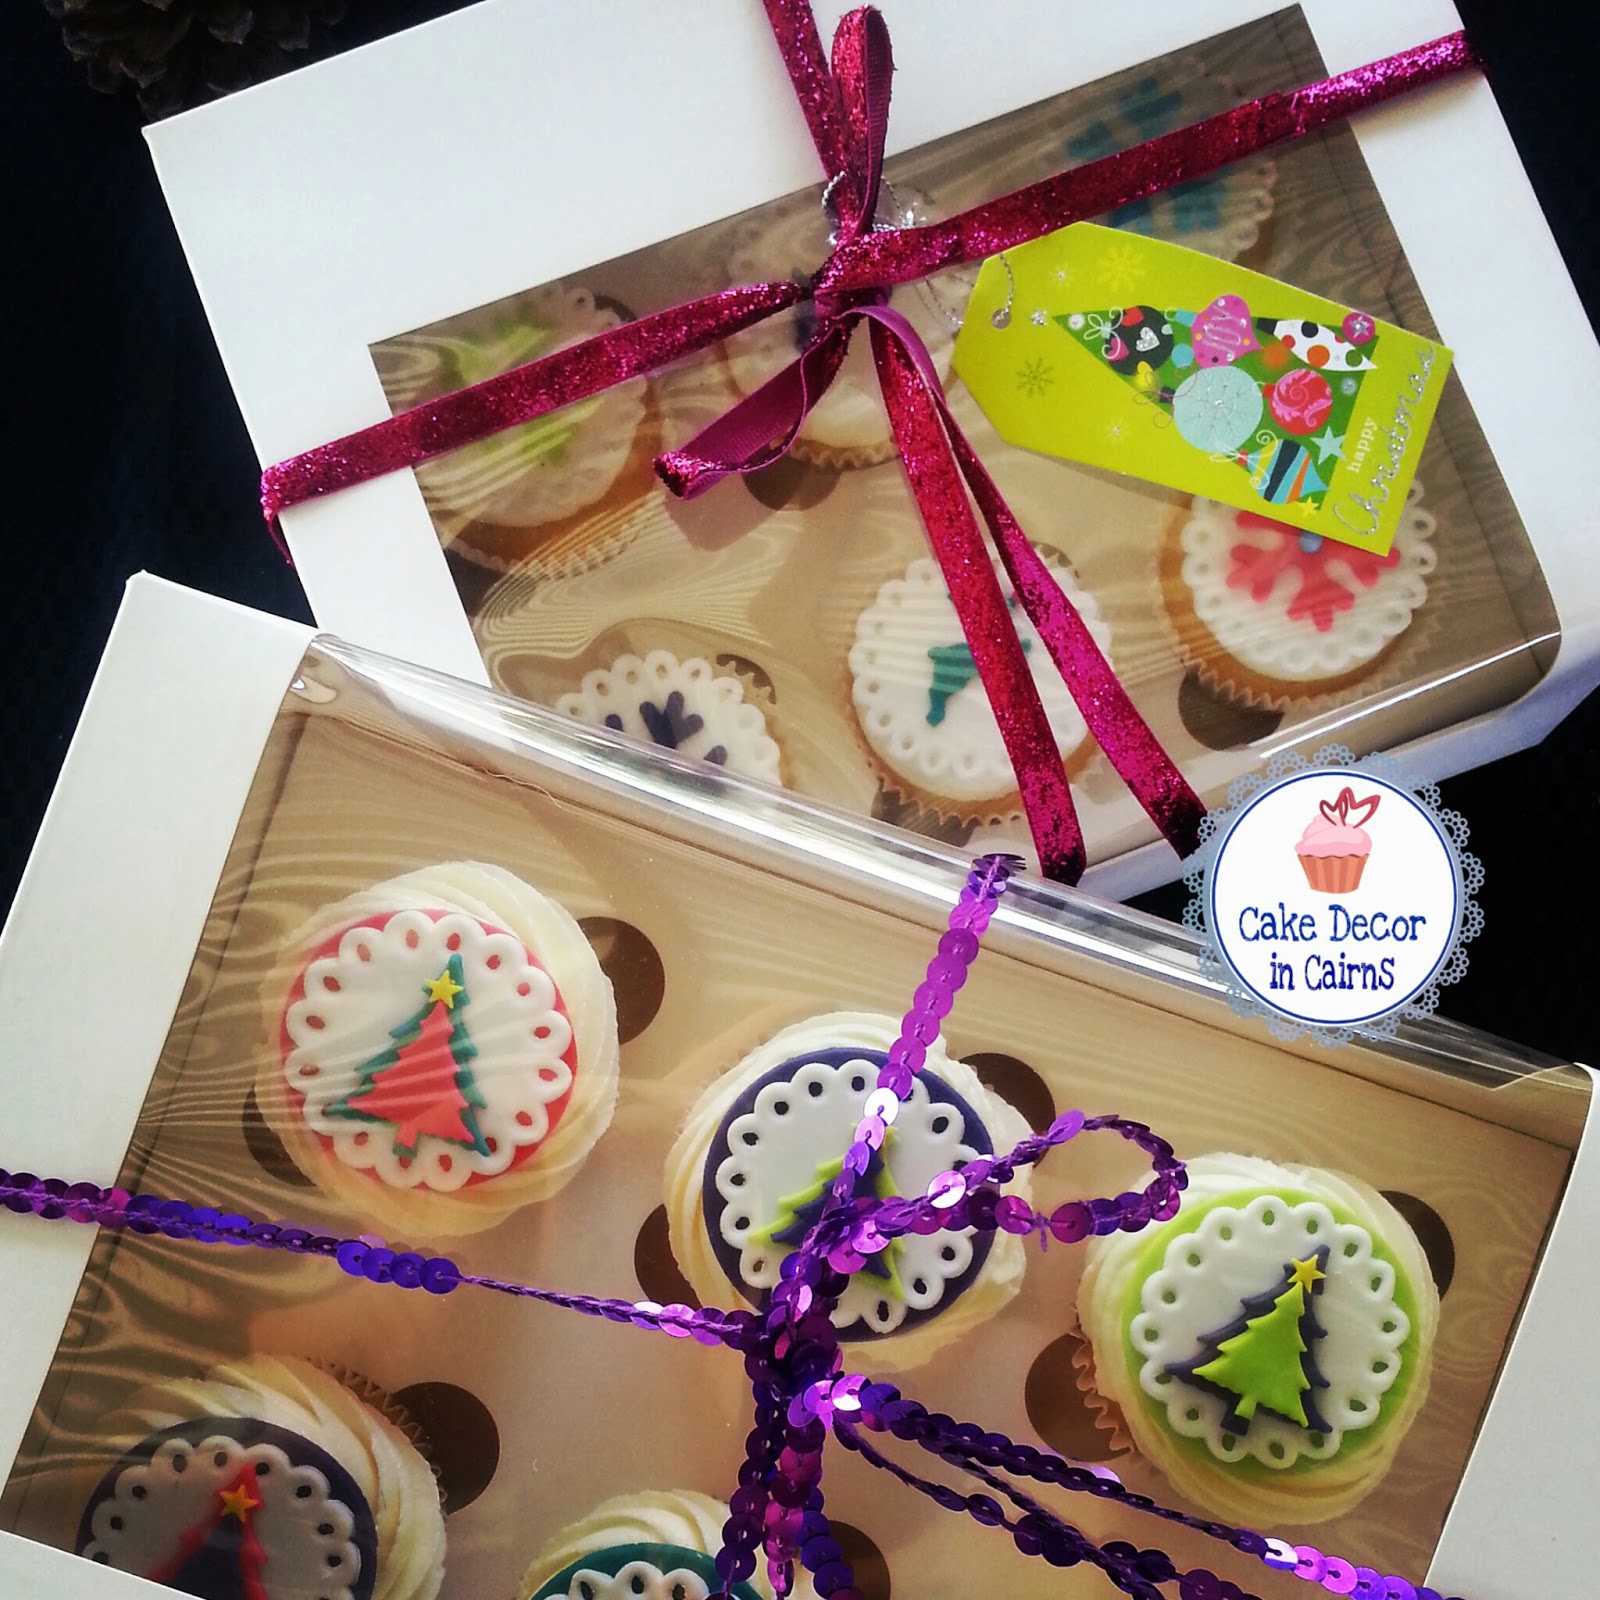 Gorgeous Christmas Cupcakes Boxed sets, Great teacher gift idea.